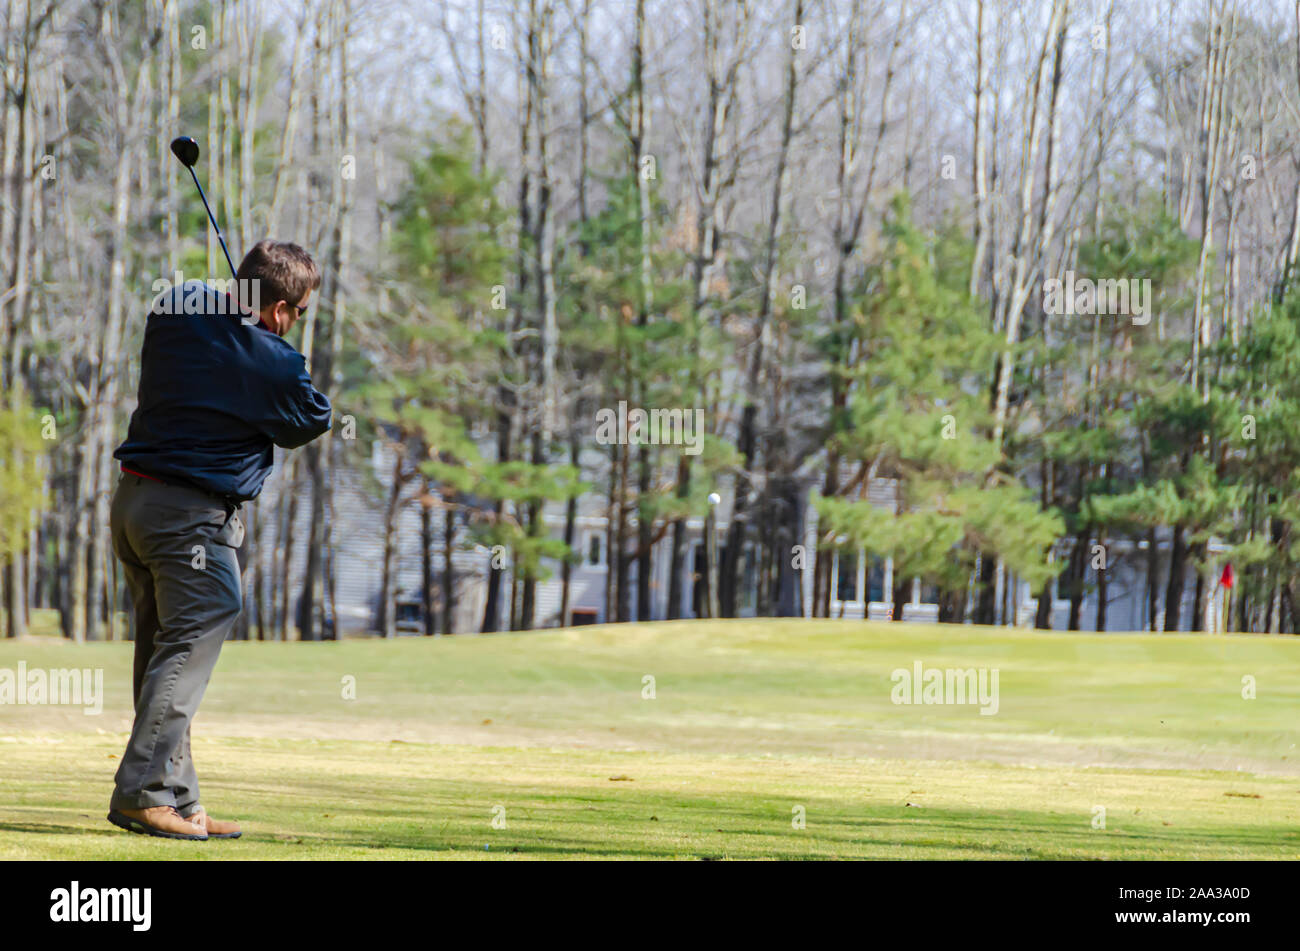 A golfer hitting the golf ball towards the putting green. Stock Photo